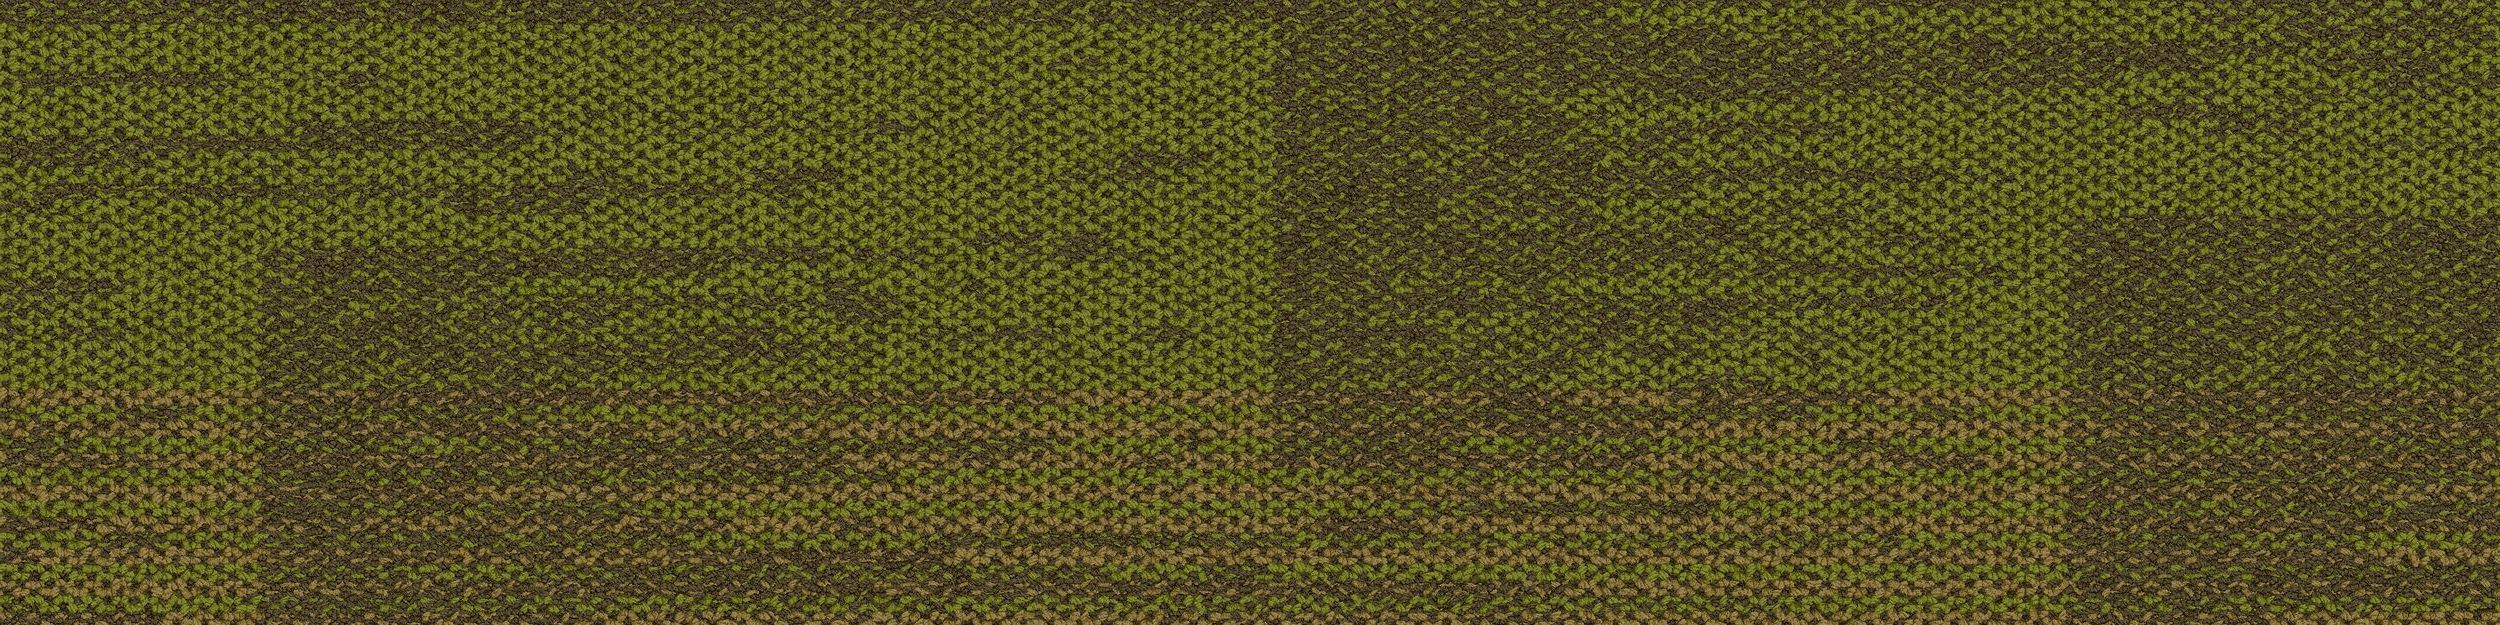 AE317 Carpet Tile In Citron image number 2